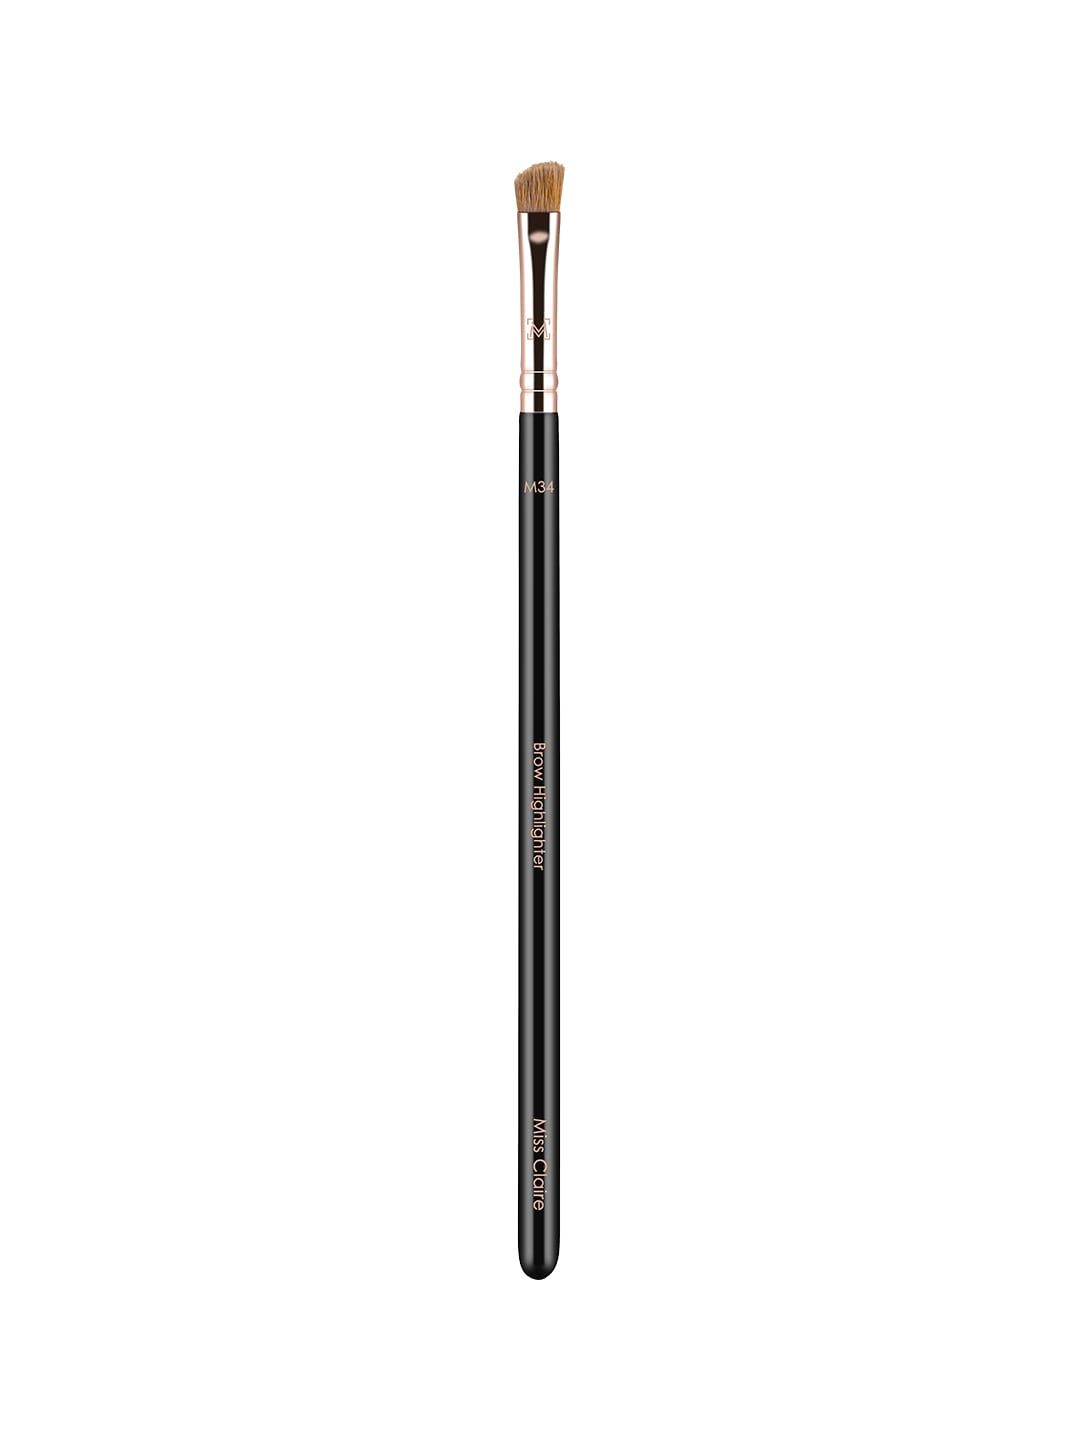 Miss Claire Brow Highlighter Brush - M34 Black & Rose Gold-Toned Price in India